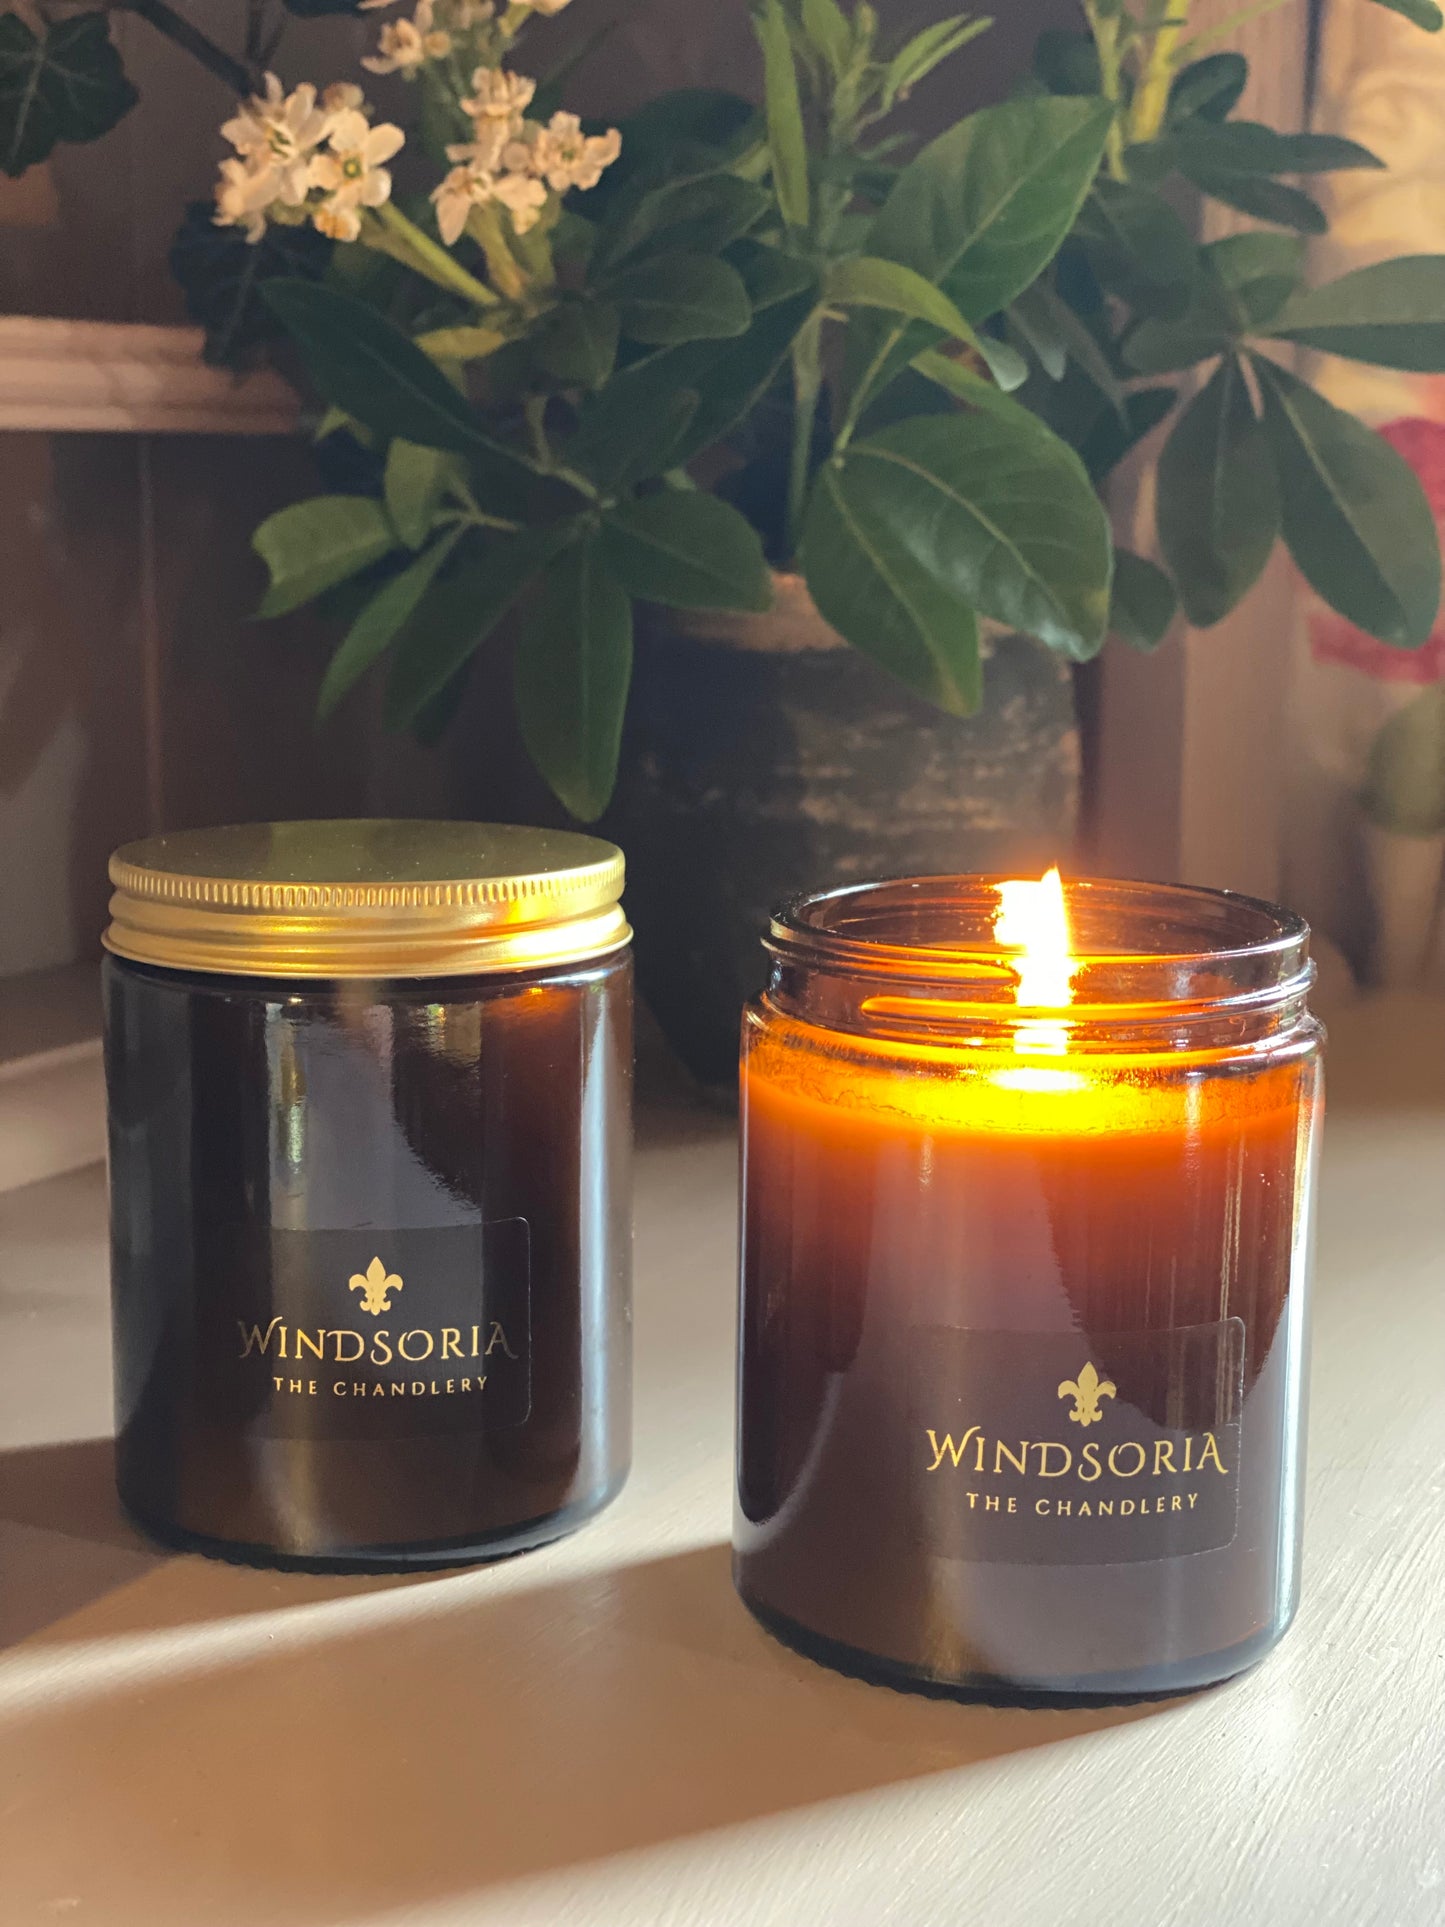 Candle Making Workshops Windsor. Candle Making Classes in Windsor. Candle Crafting Courses Windsor. Learn Candle Making Windsor. Creative Candle Workshops Windsor. Handmade Candle Classes Windsor. Candle Artistry Workshops in Windsor. Candle Making Lessons by Windsoria. 